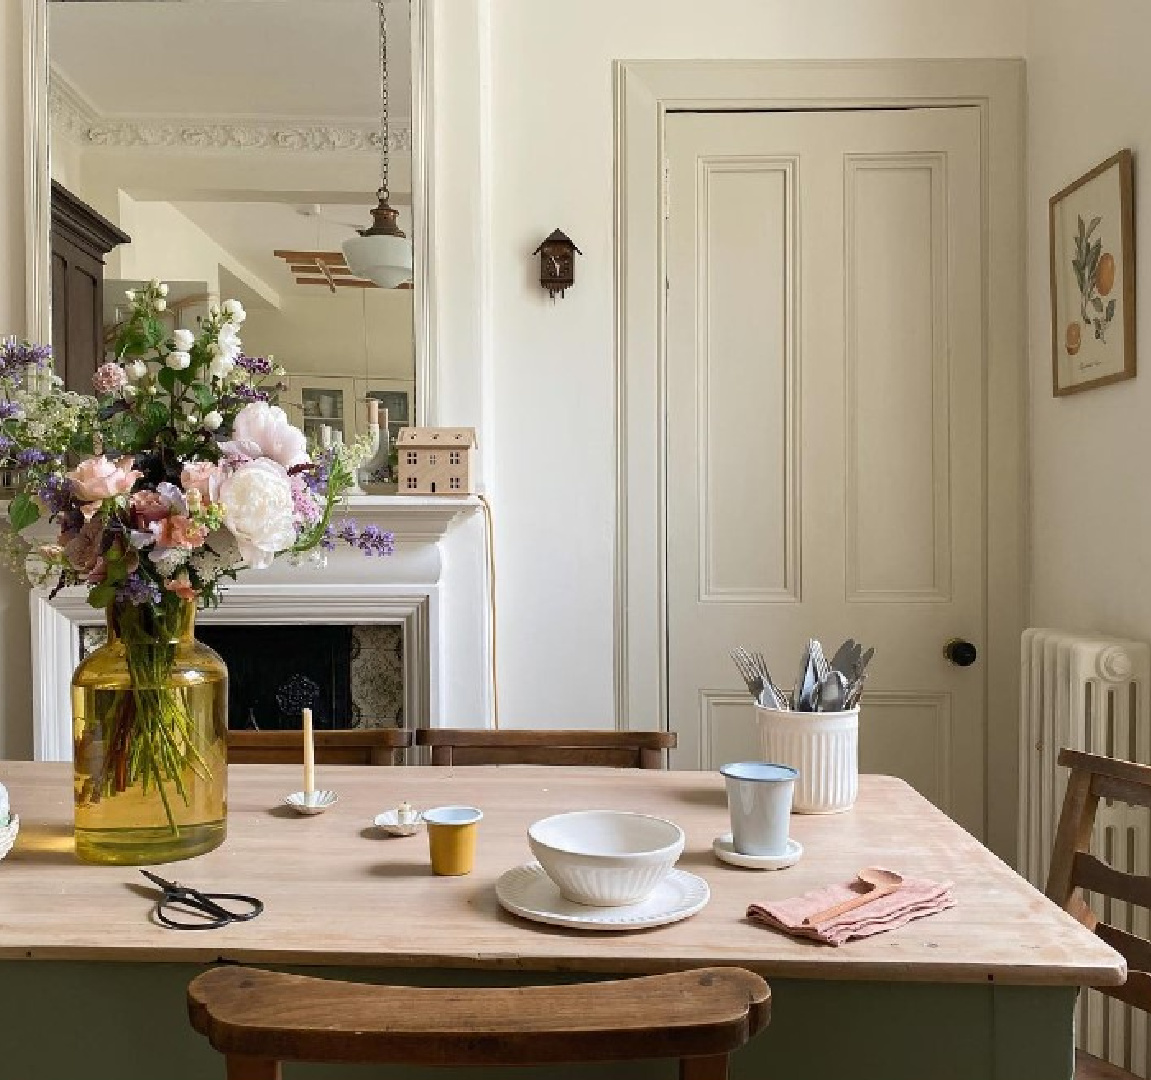 Farrow & Ball Wimborne White in a dining room by @home_stead. #wimbornewhite